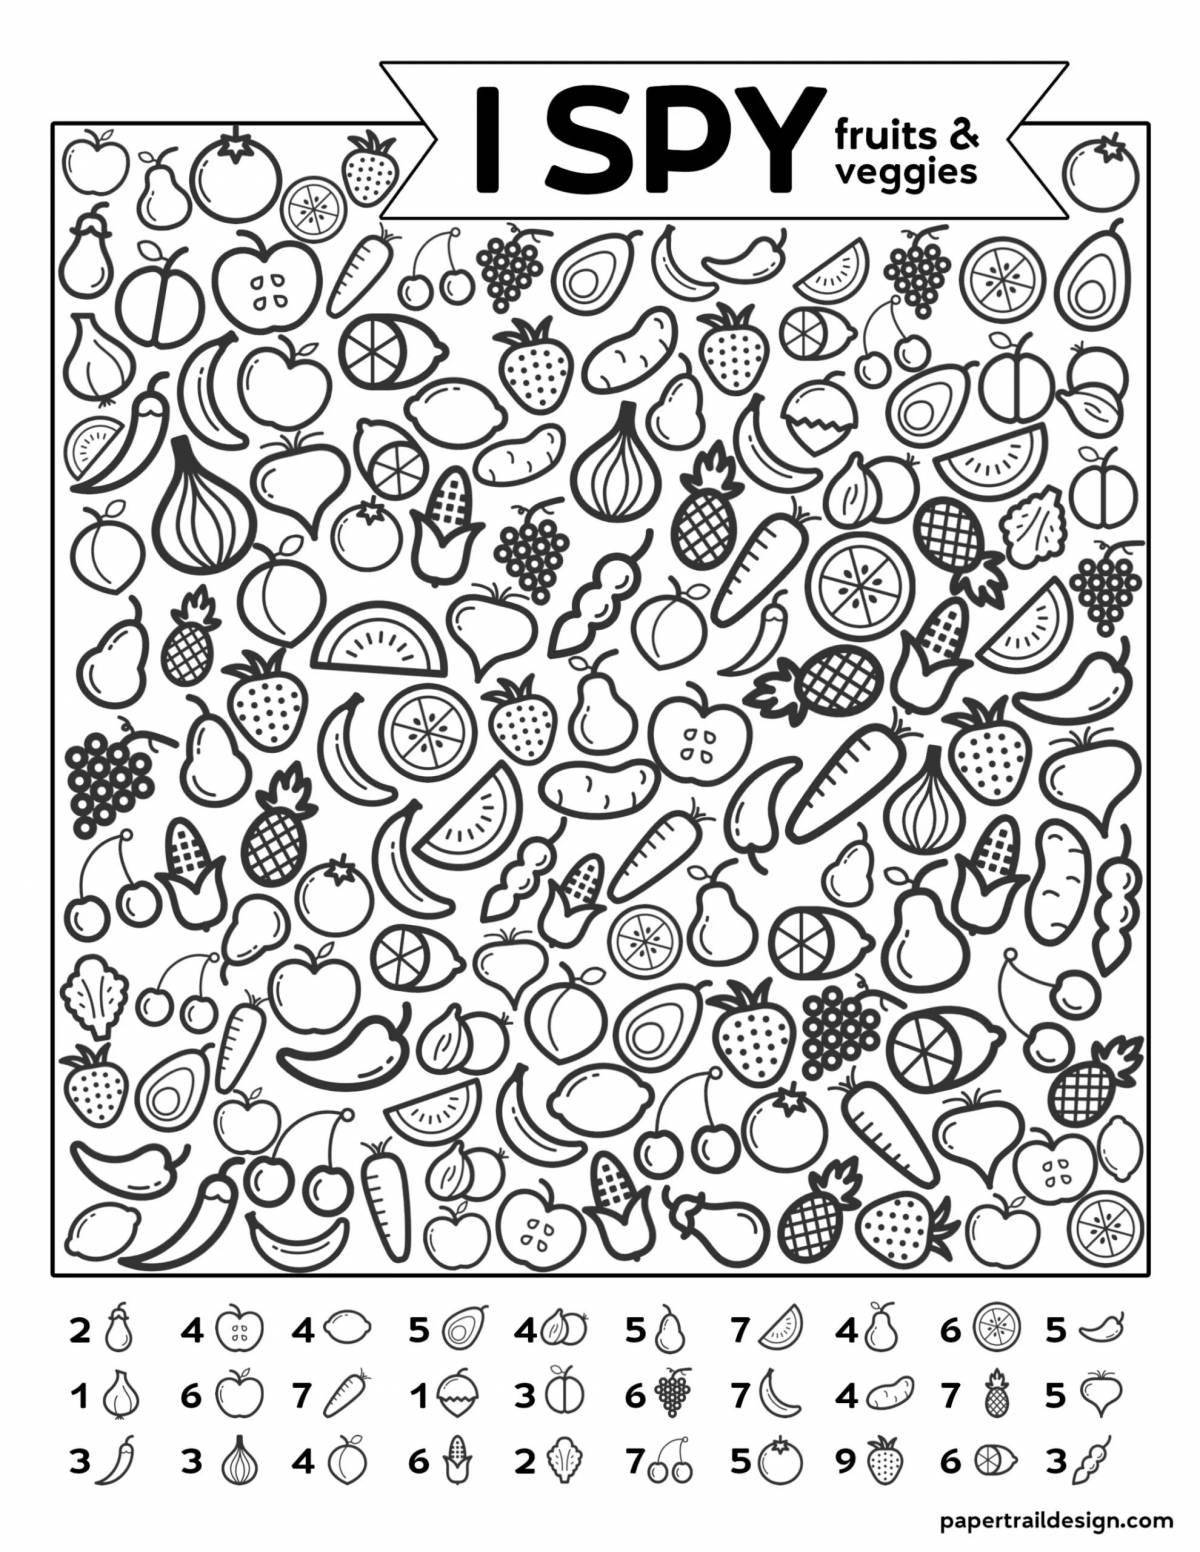 Peaceful mindfulness coloring pages